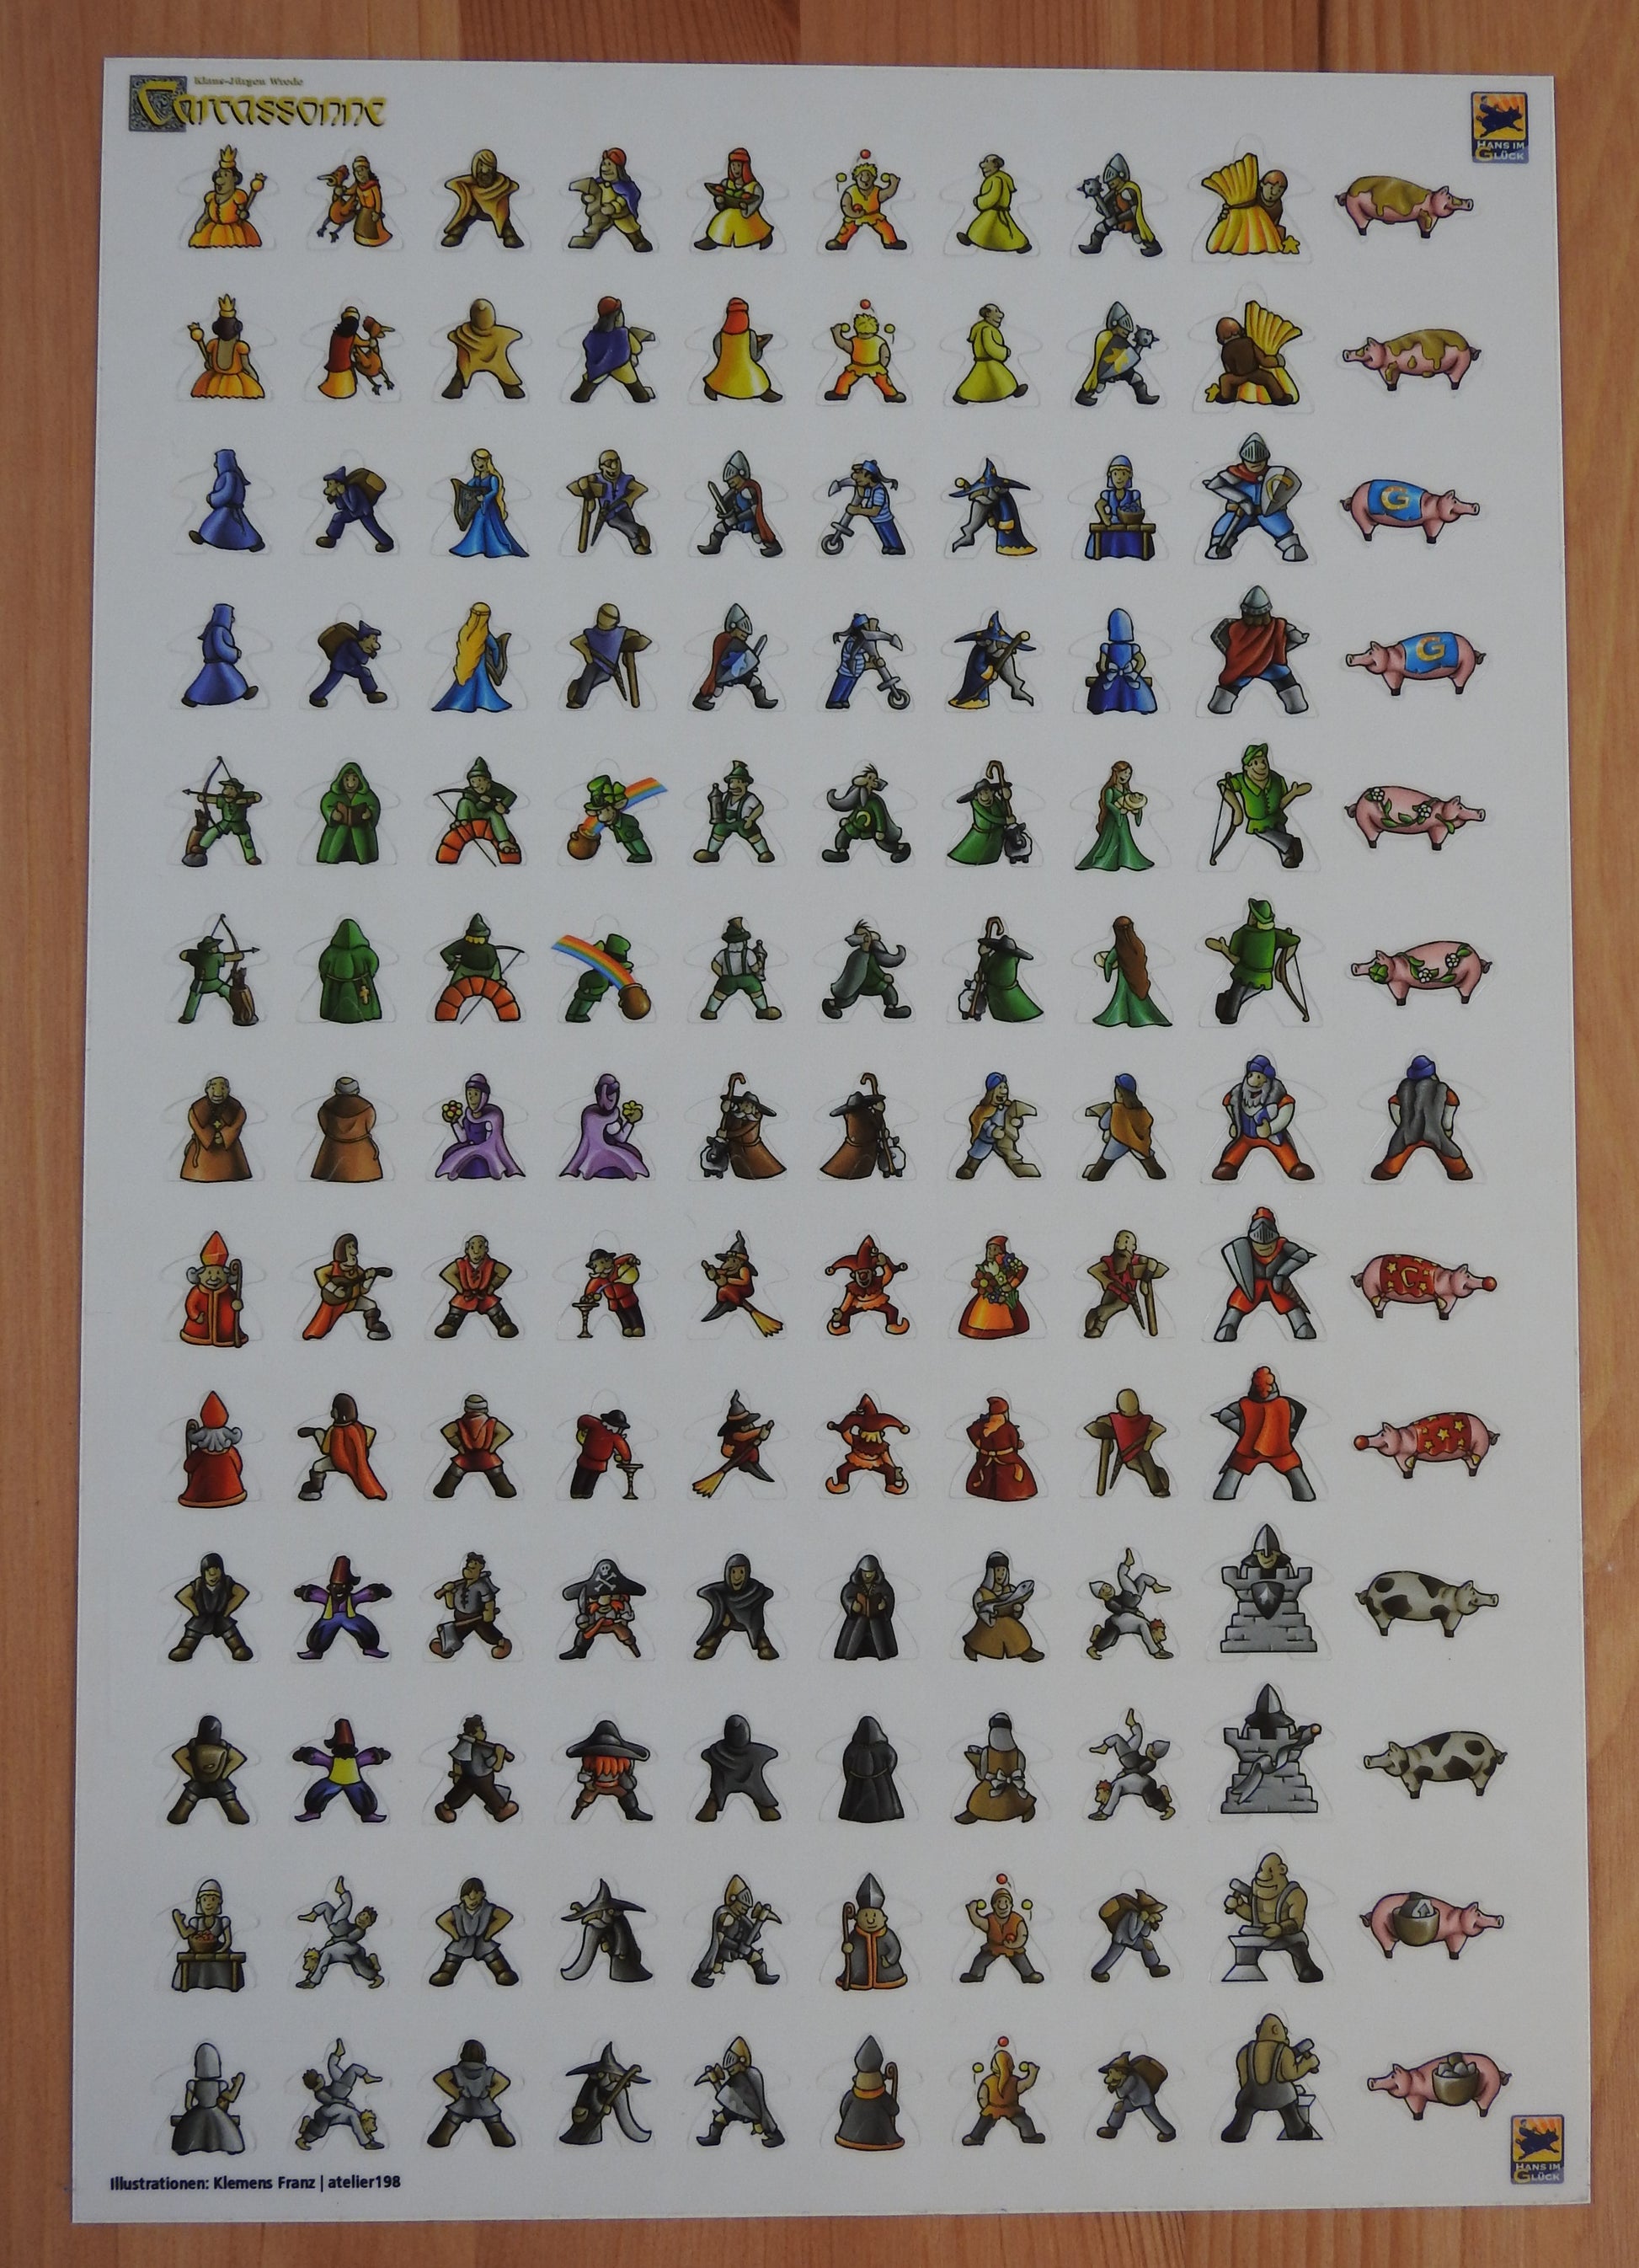 Sticker sheet of 130 meeple stickers to attach to pieces used in the Carcassonne board game.